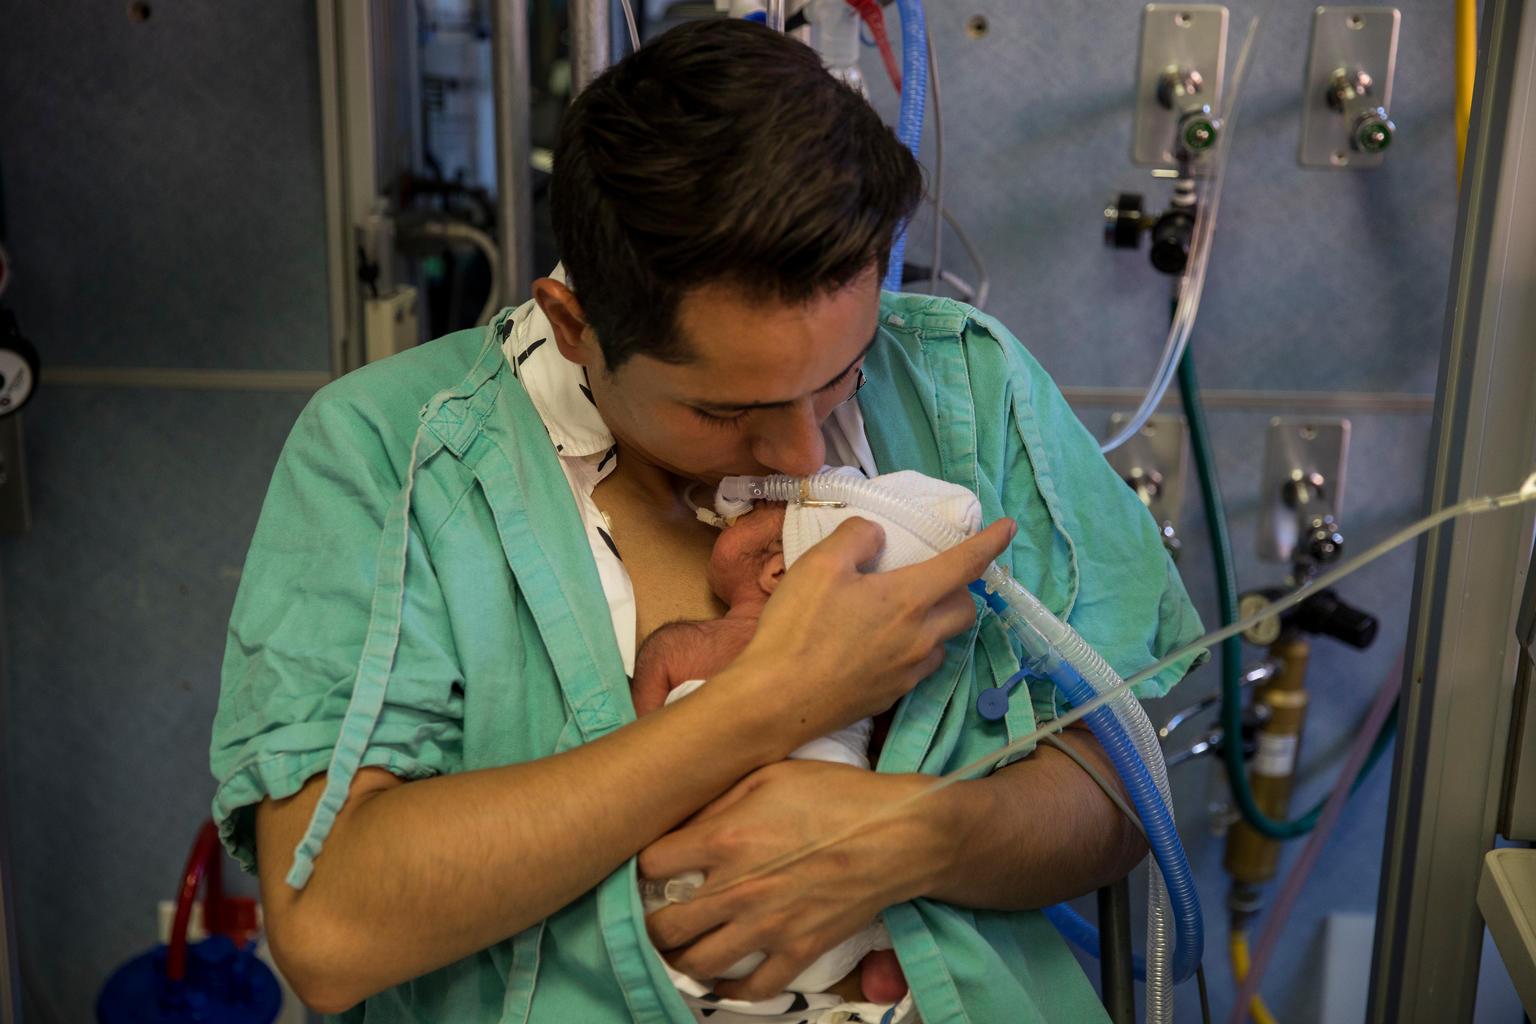 Rogelio Cruz Barrera holds one of his twins born prematurely, a baby girl named Ximena, in Mexico City